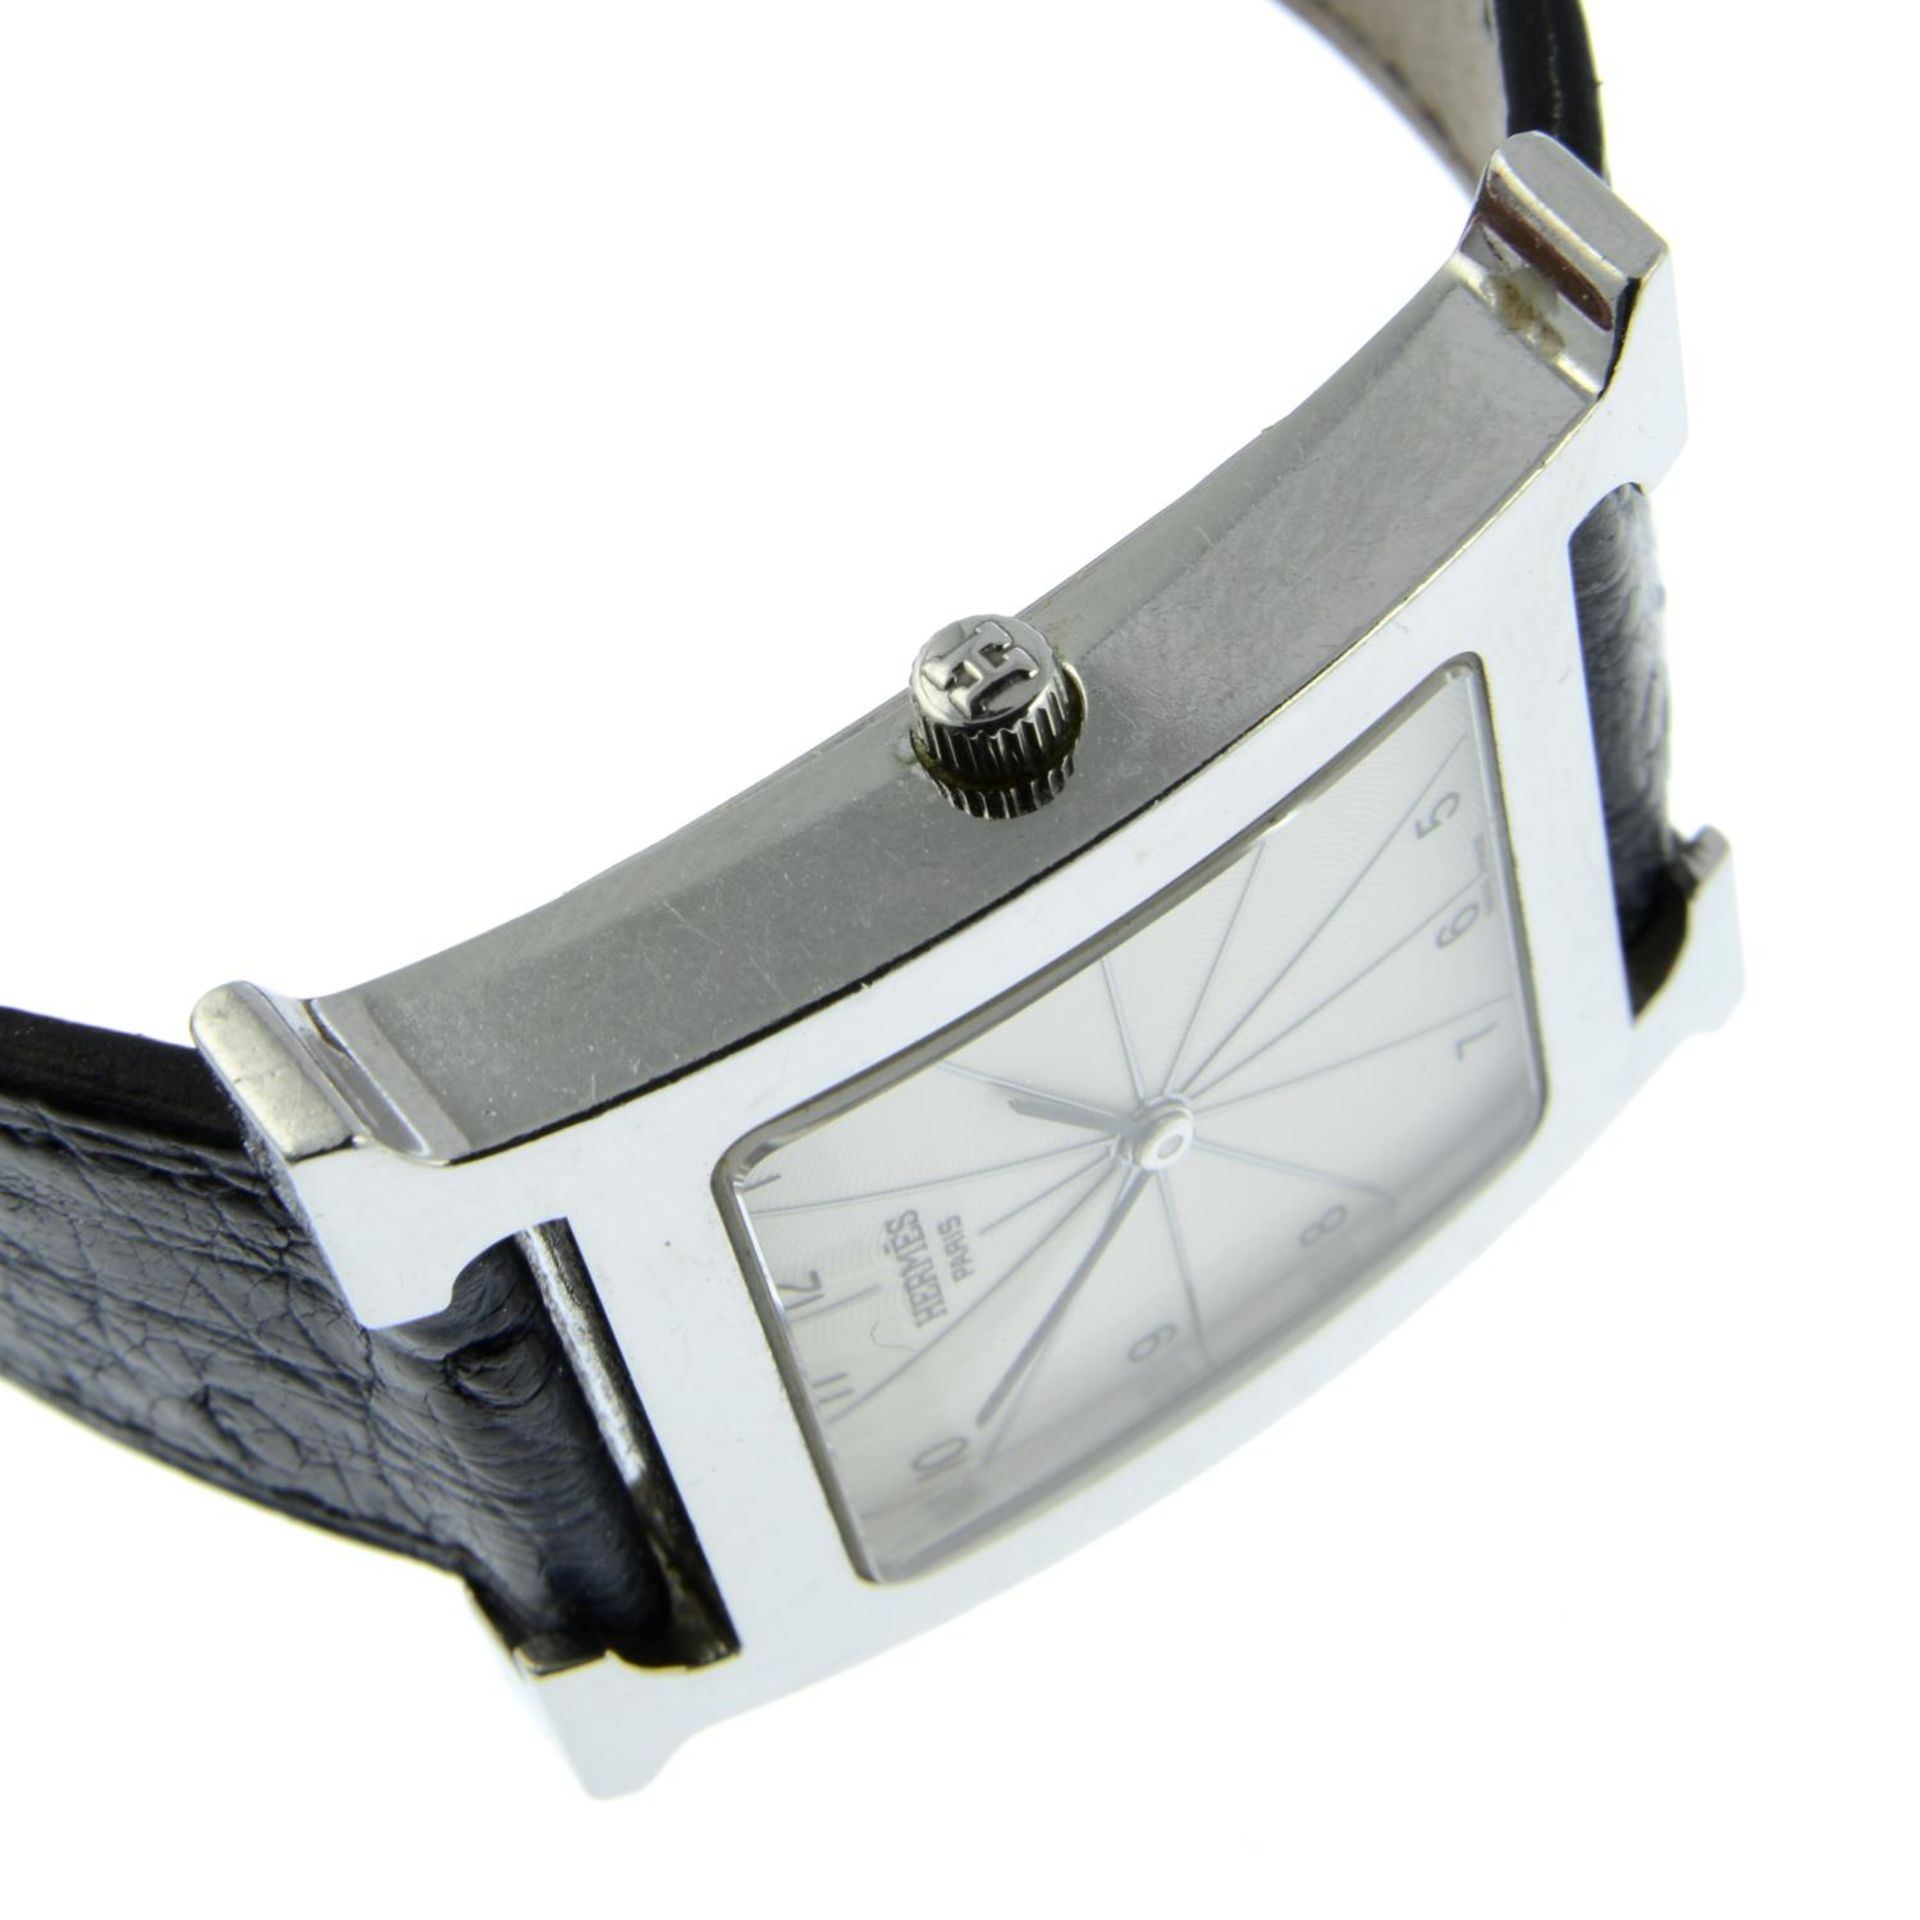 HERMÈS - a mid-size Heure H wrist watch. - Image 3 of 4